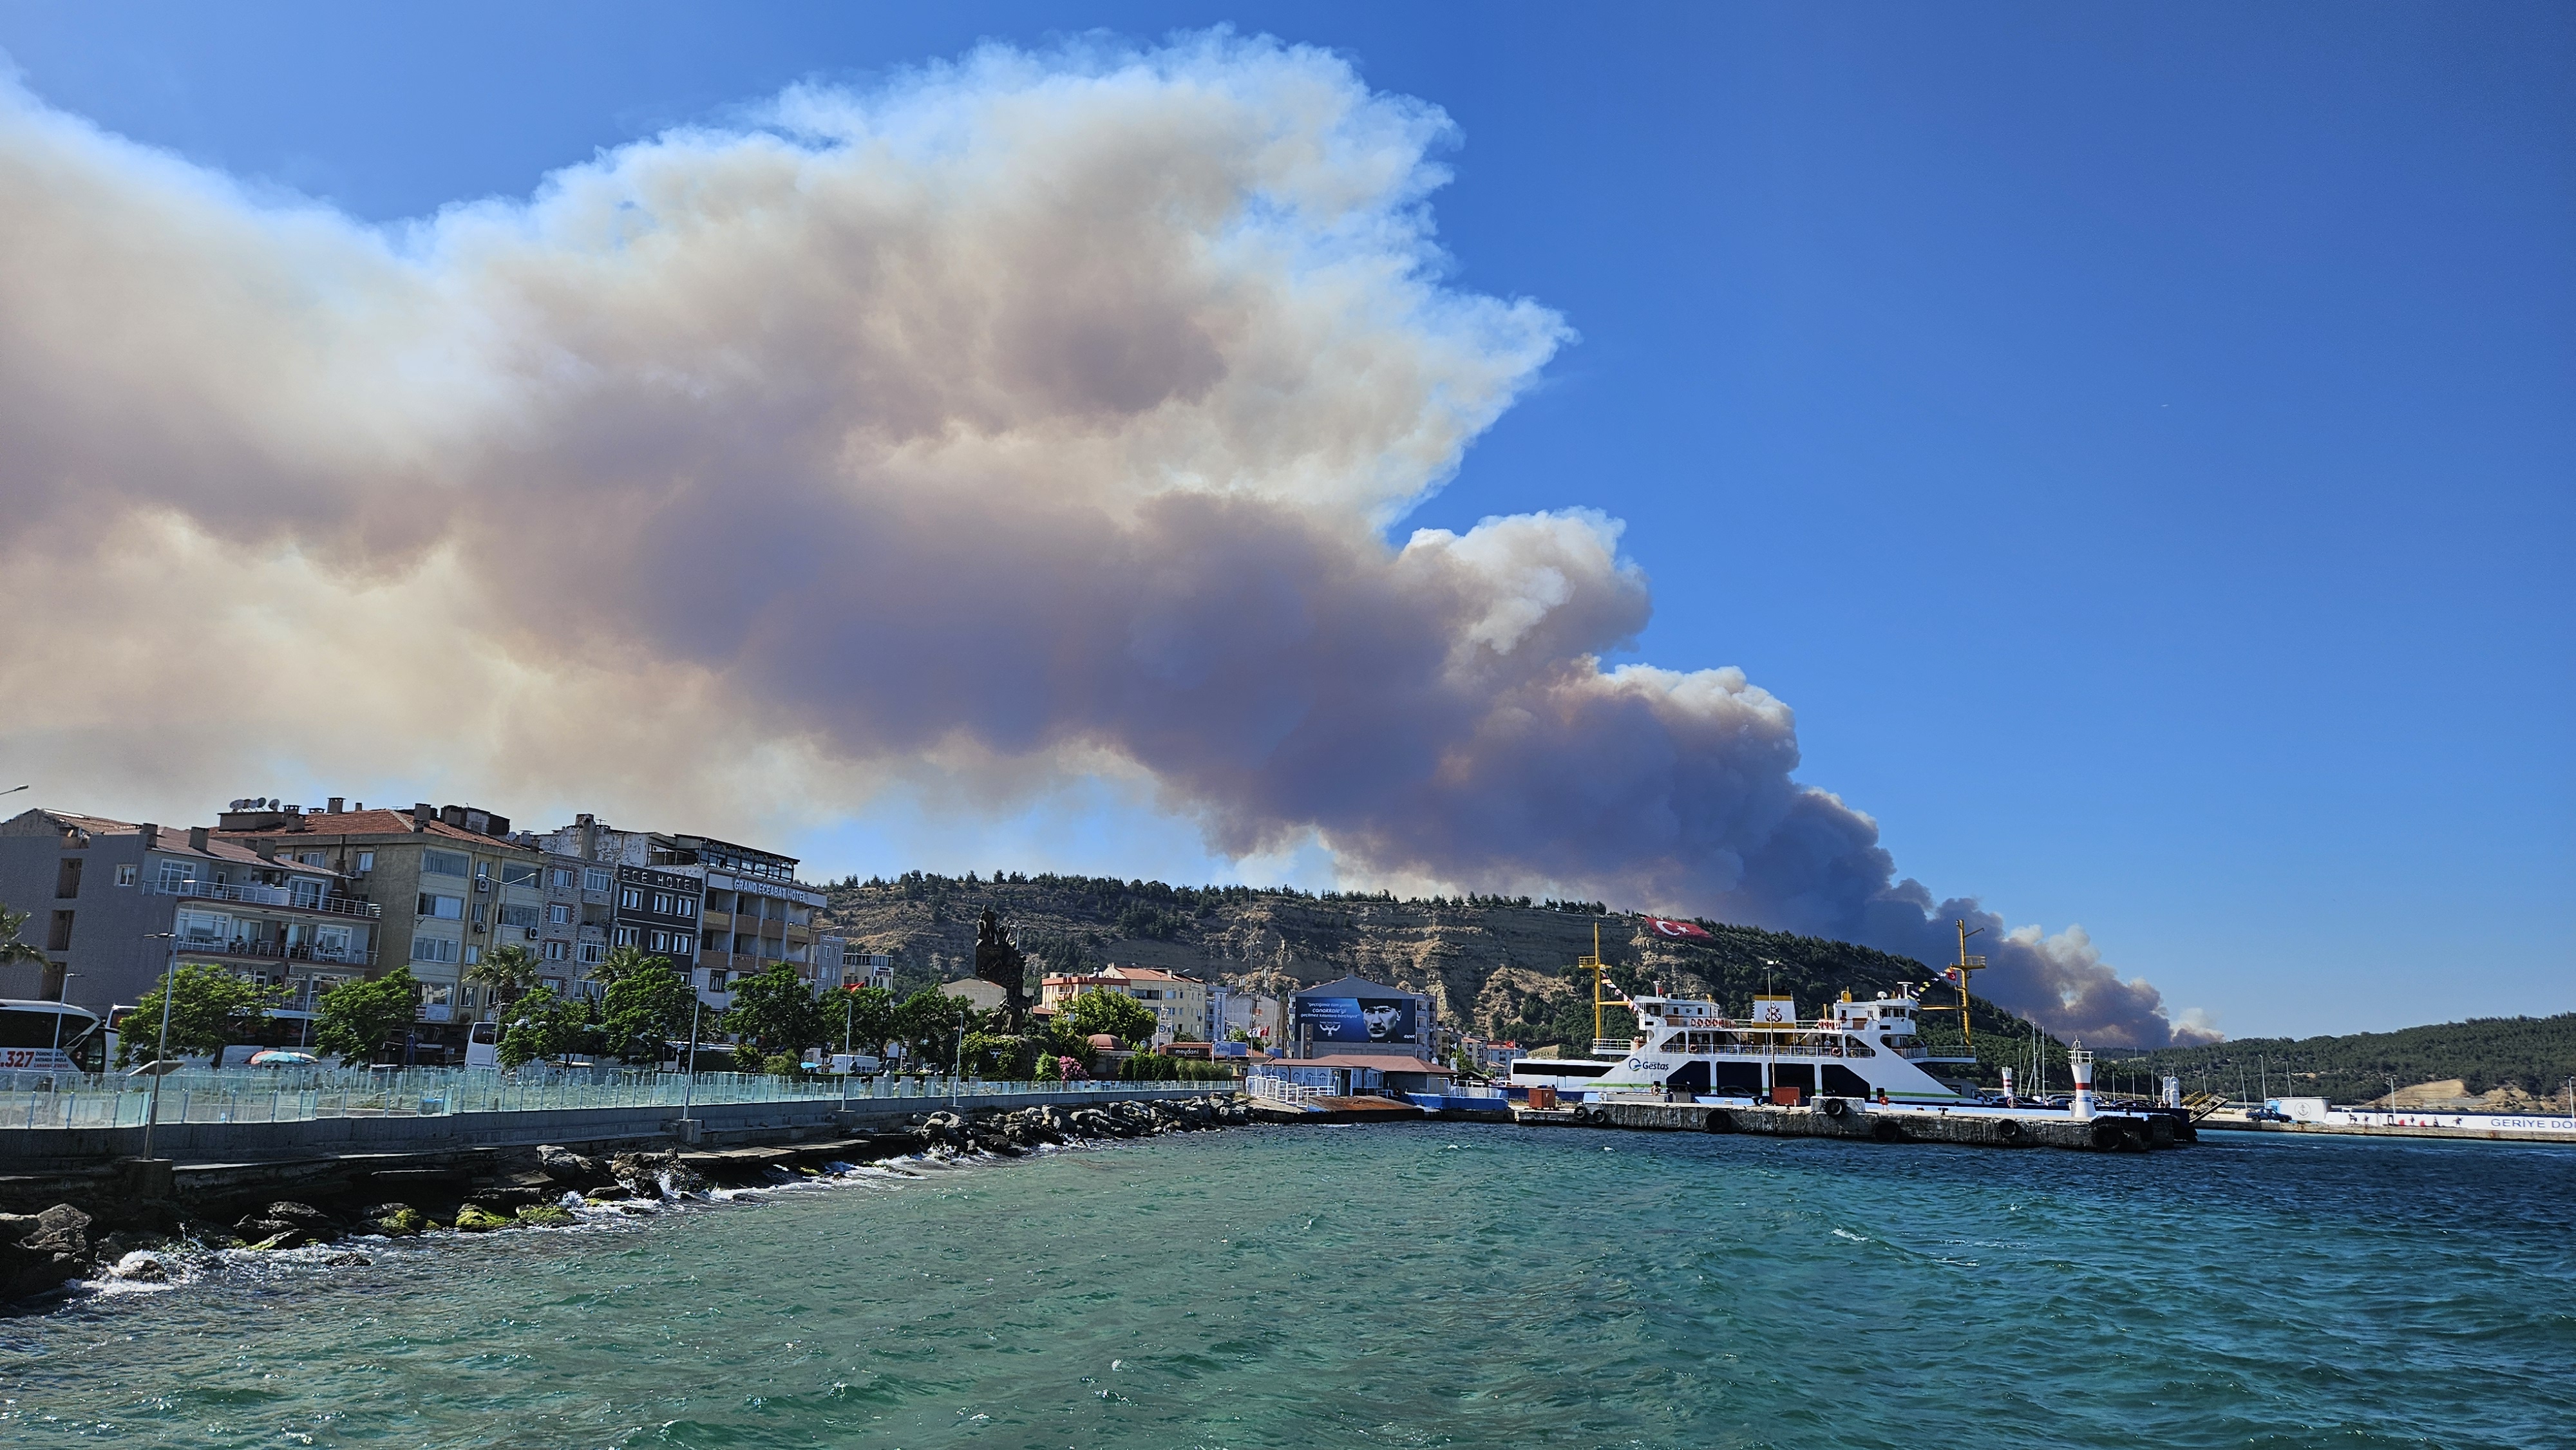 aa-20240618-34912066-34912062-oneway-ship-traffic-in-the-canakkale-strait-was-suspended-due-to-forest-fire.jpg